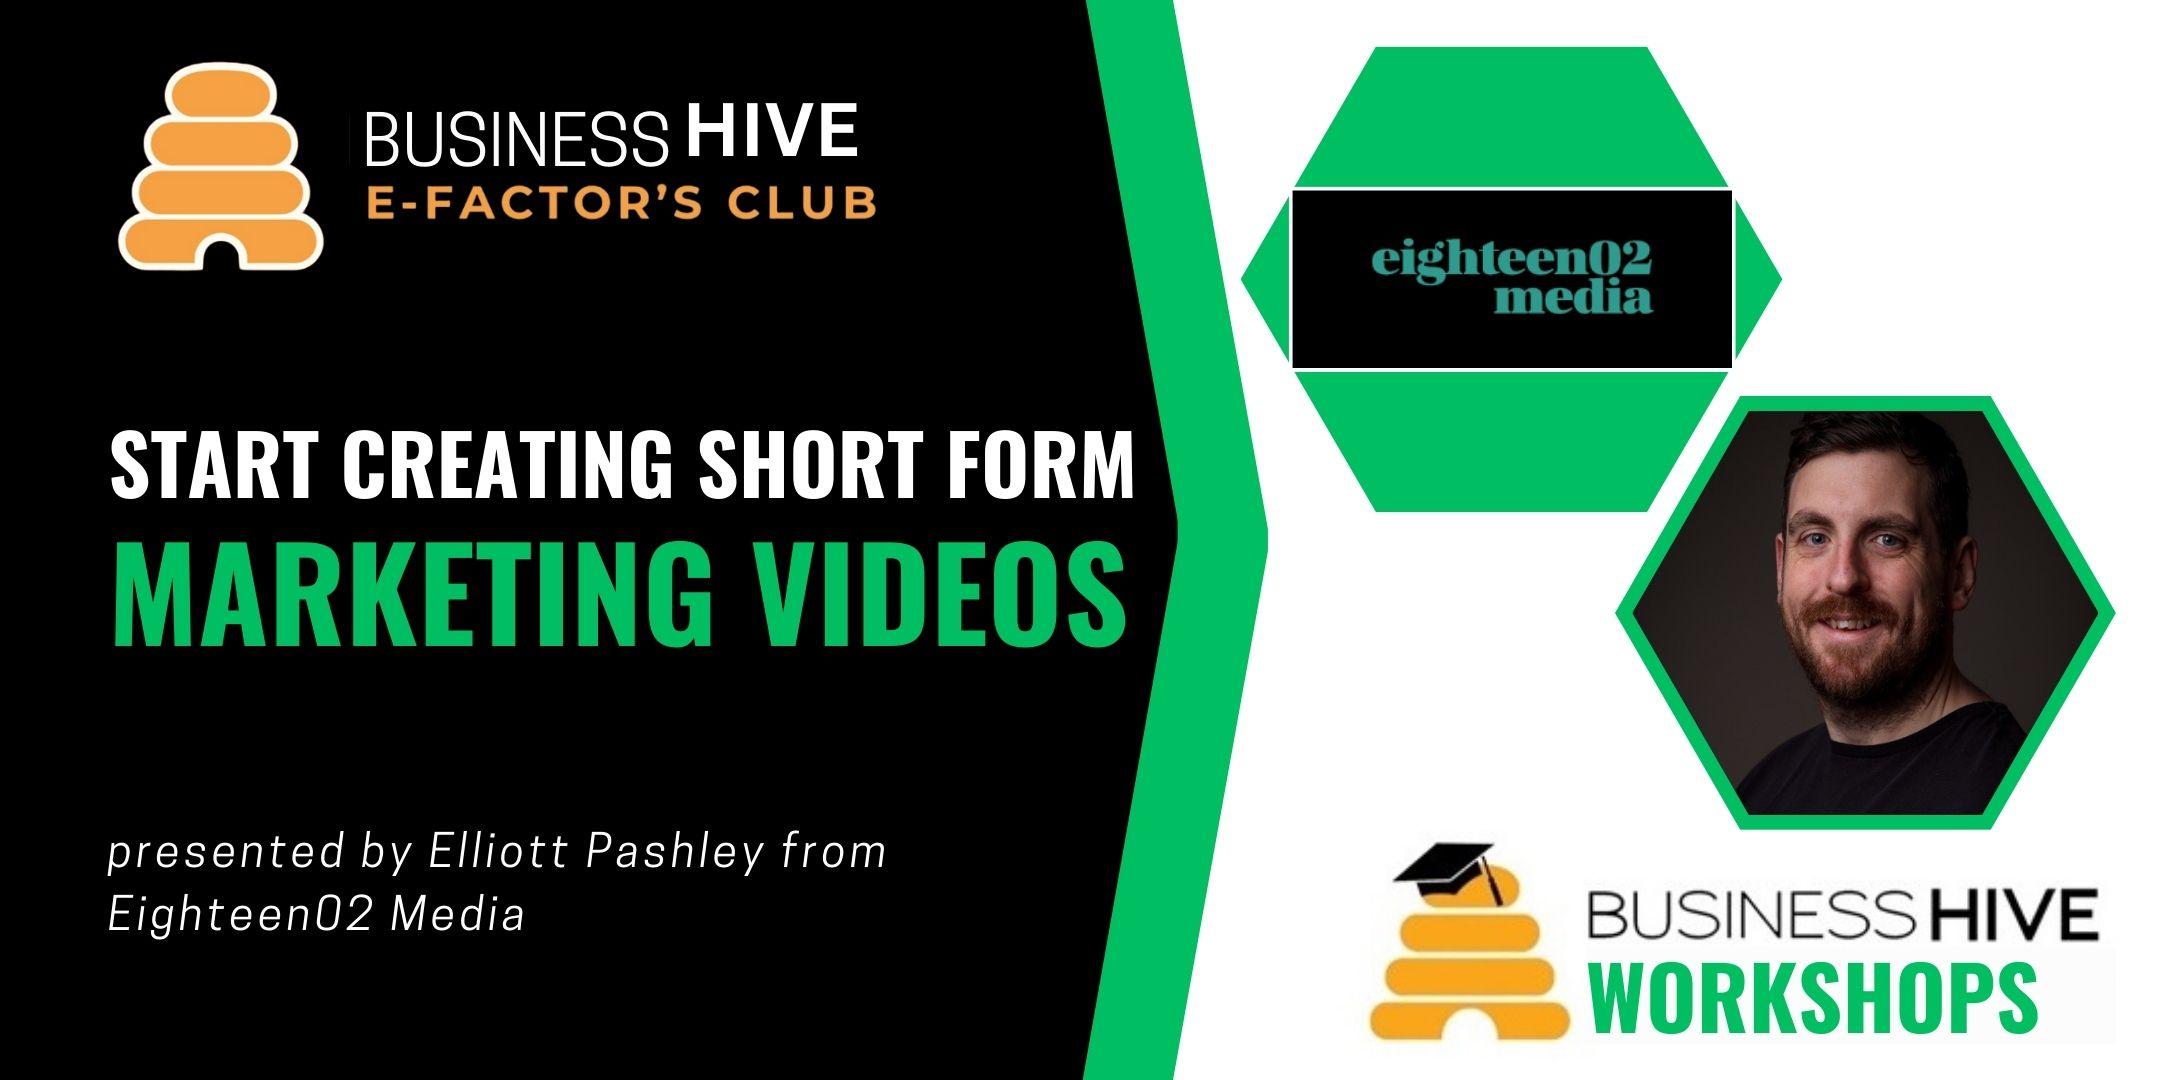 A promotional graphic for a "Creating Videos Workshop" titled "Start Creating Short Form Marketing Videos" presented by Elliott Pashley from Eighteen02 Media, sponsored by Business Hive E-Factor's Club